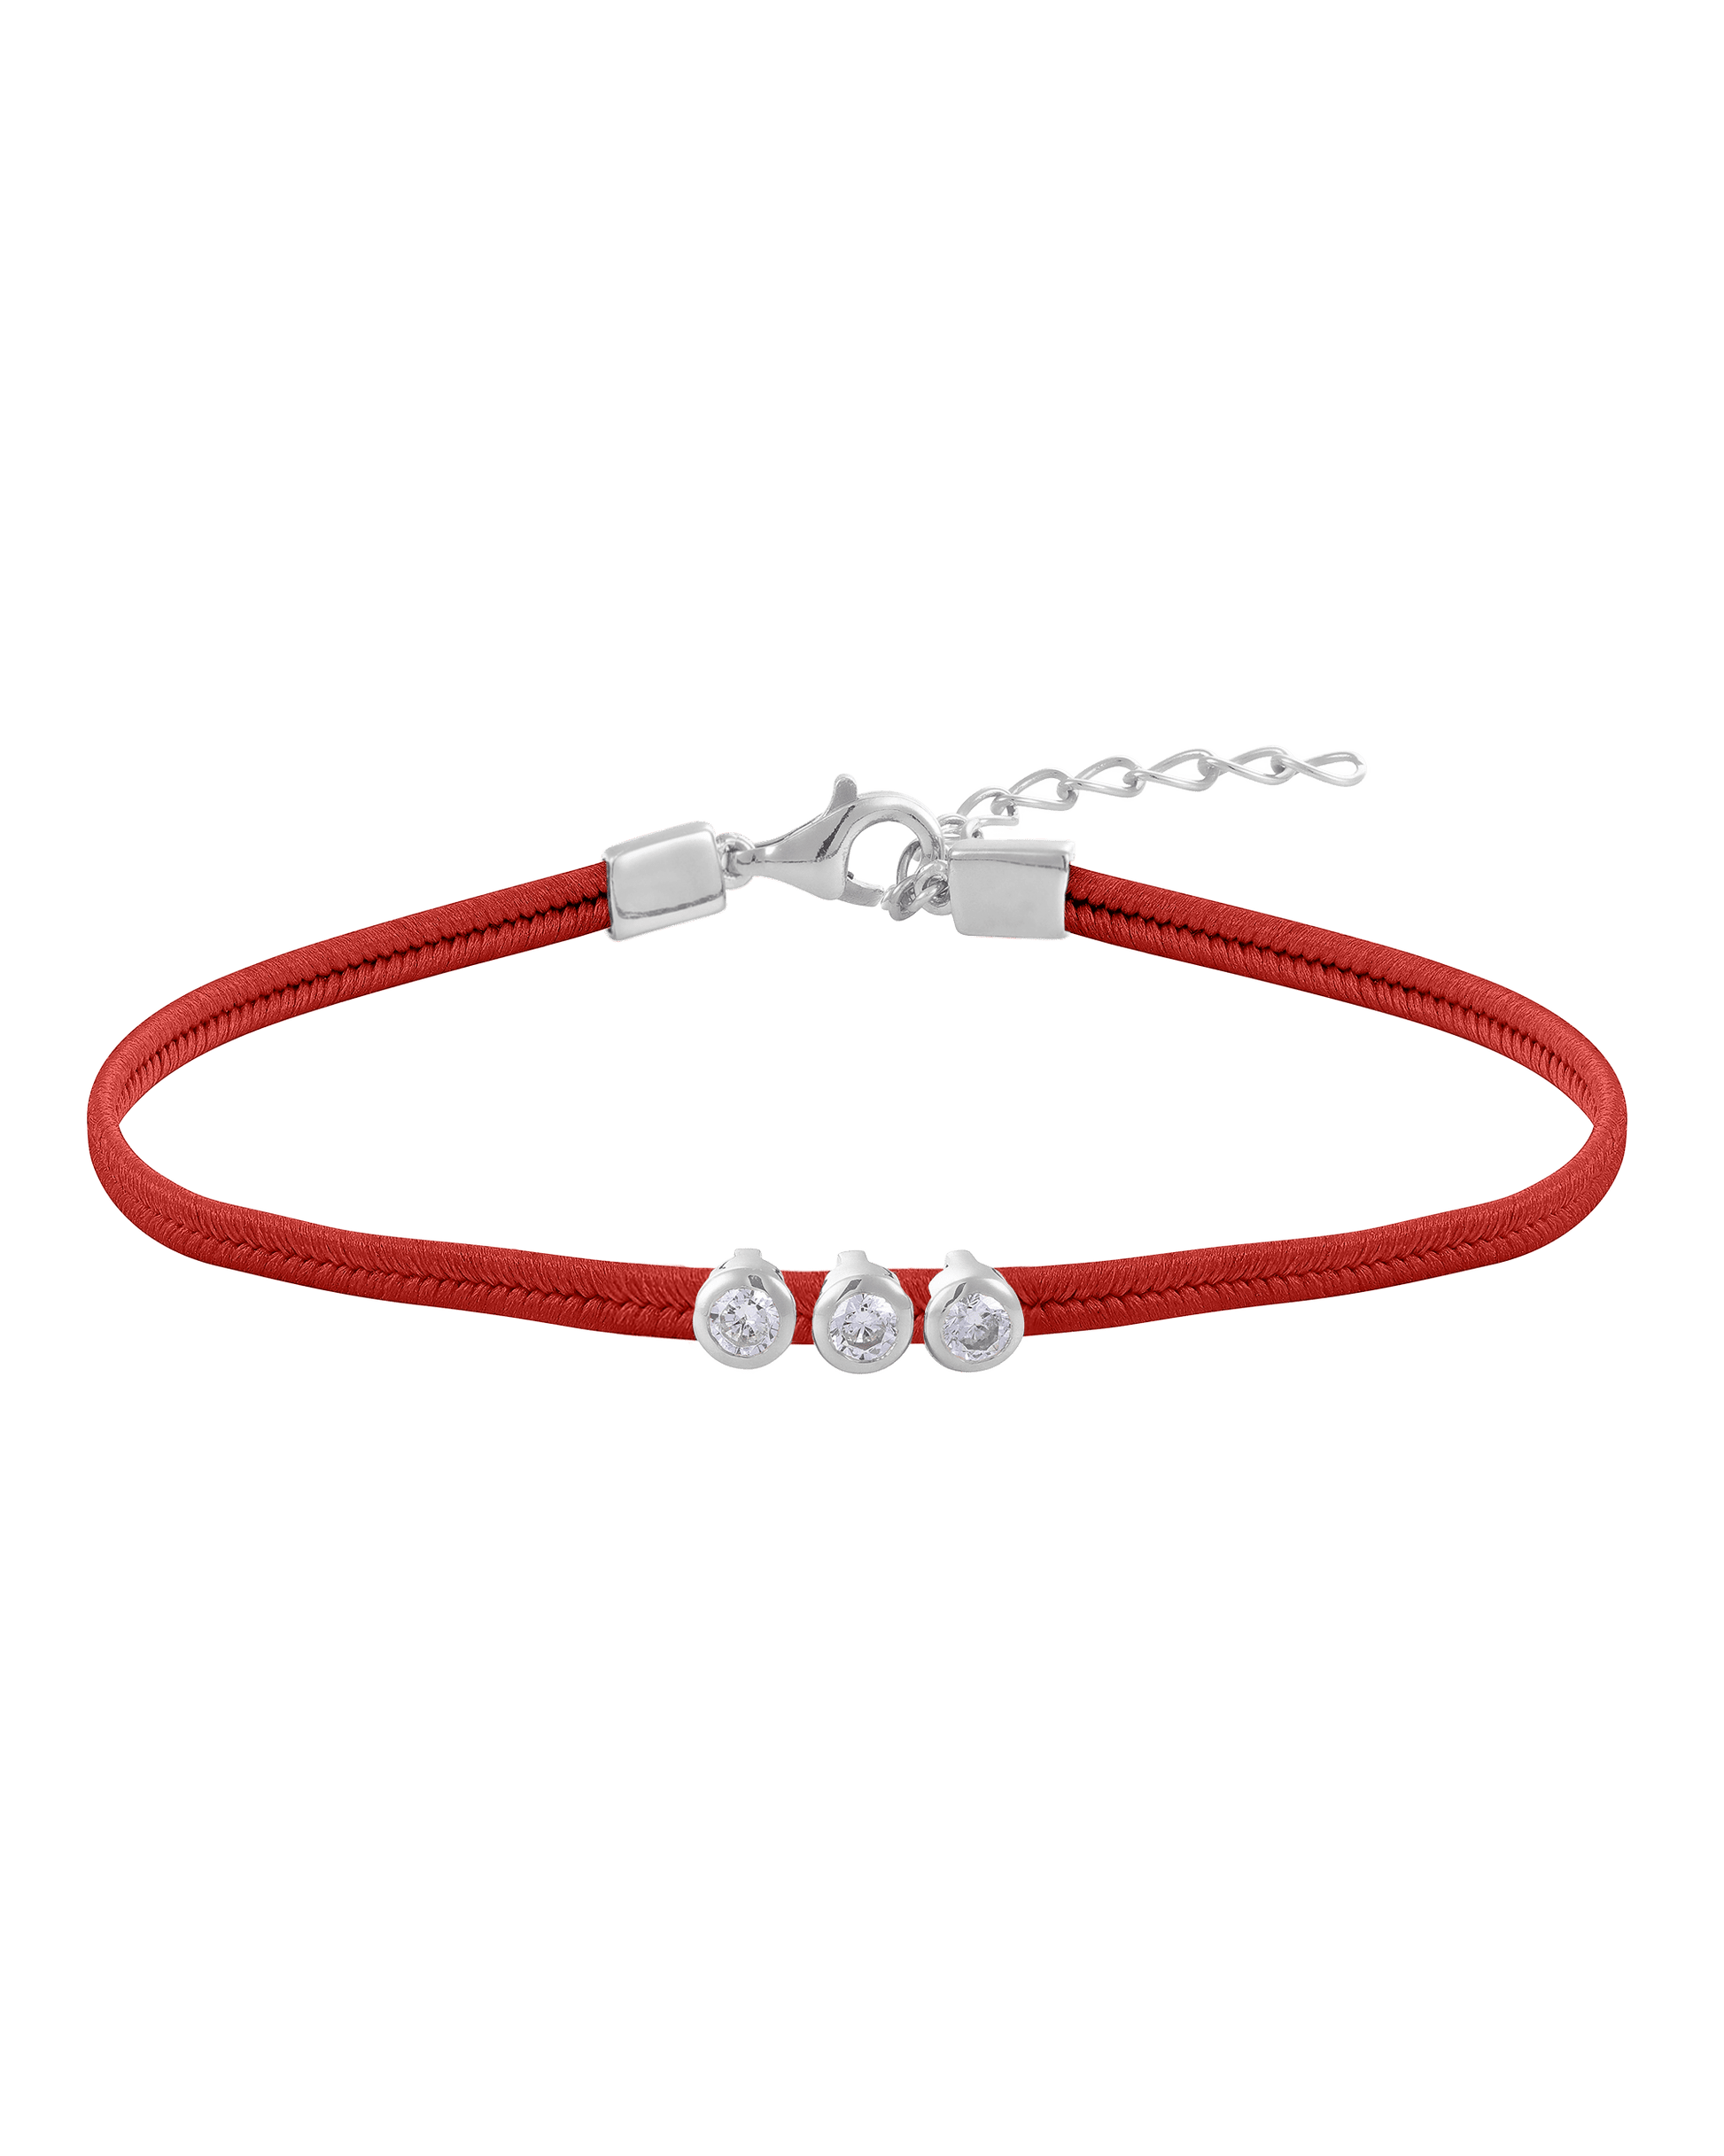 The Cord of Love - 925 Sterling Silver Bracelets magal-dev 1 Diamond Red 